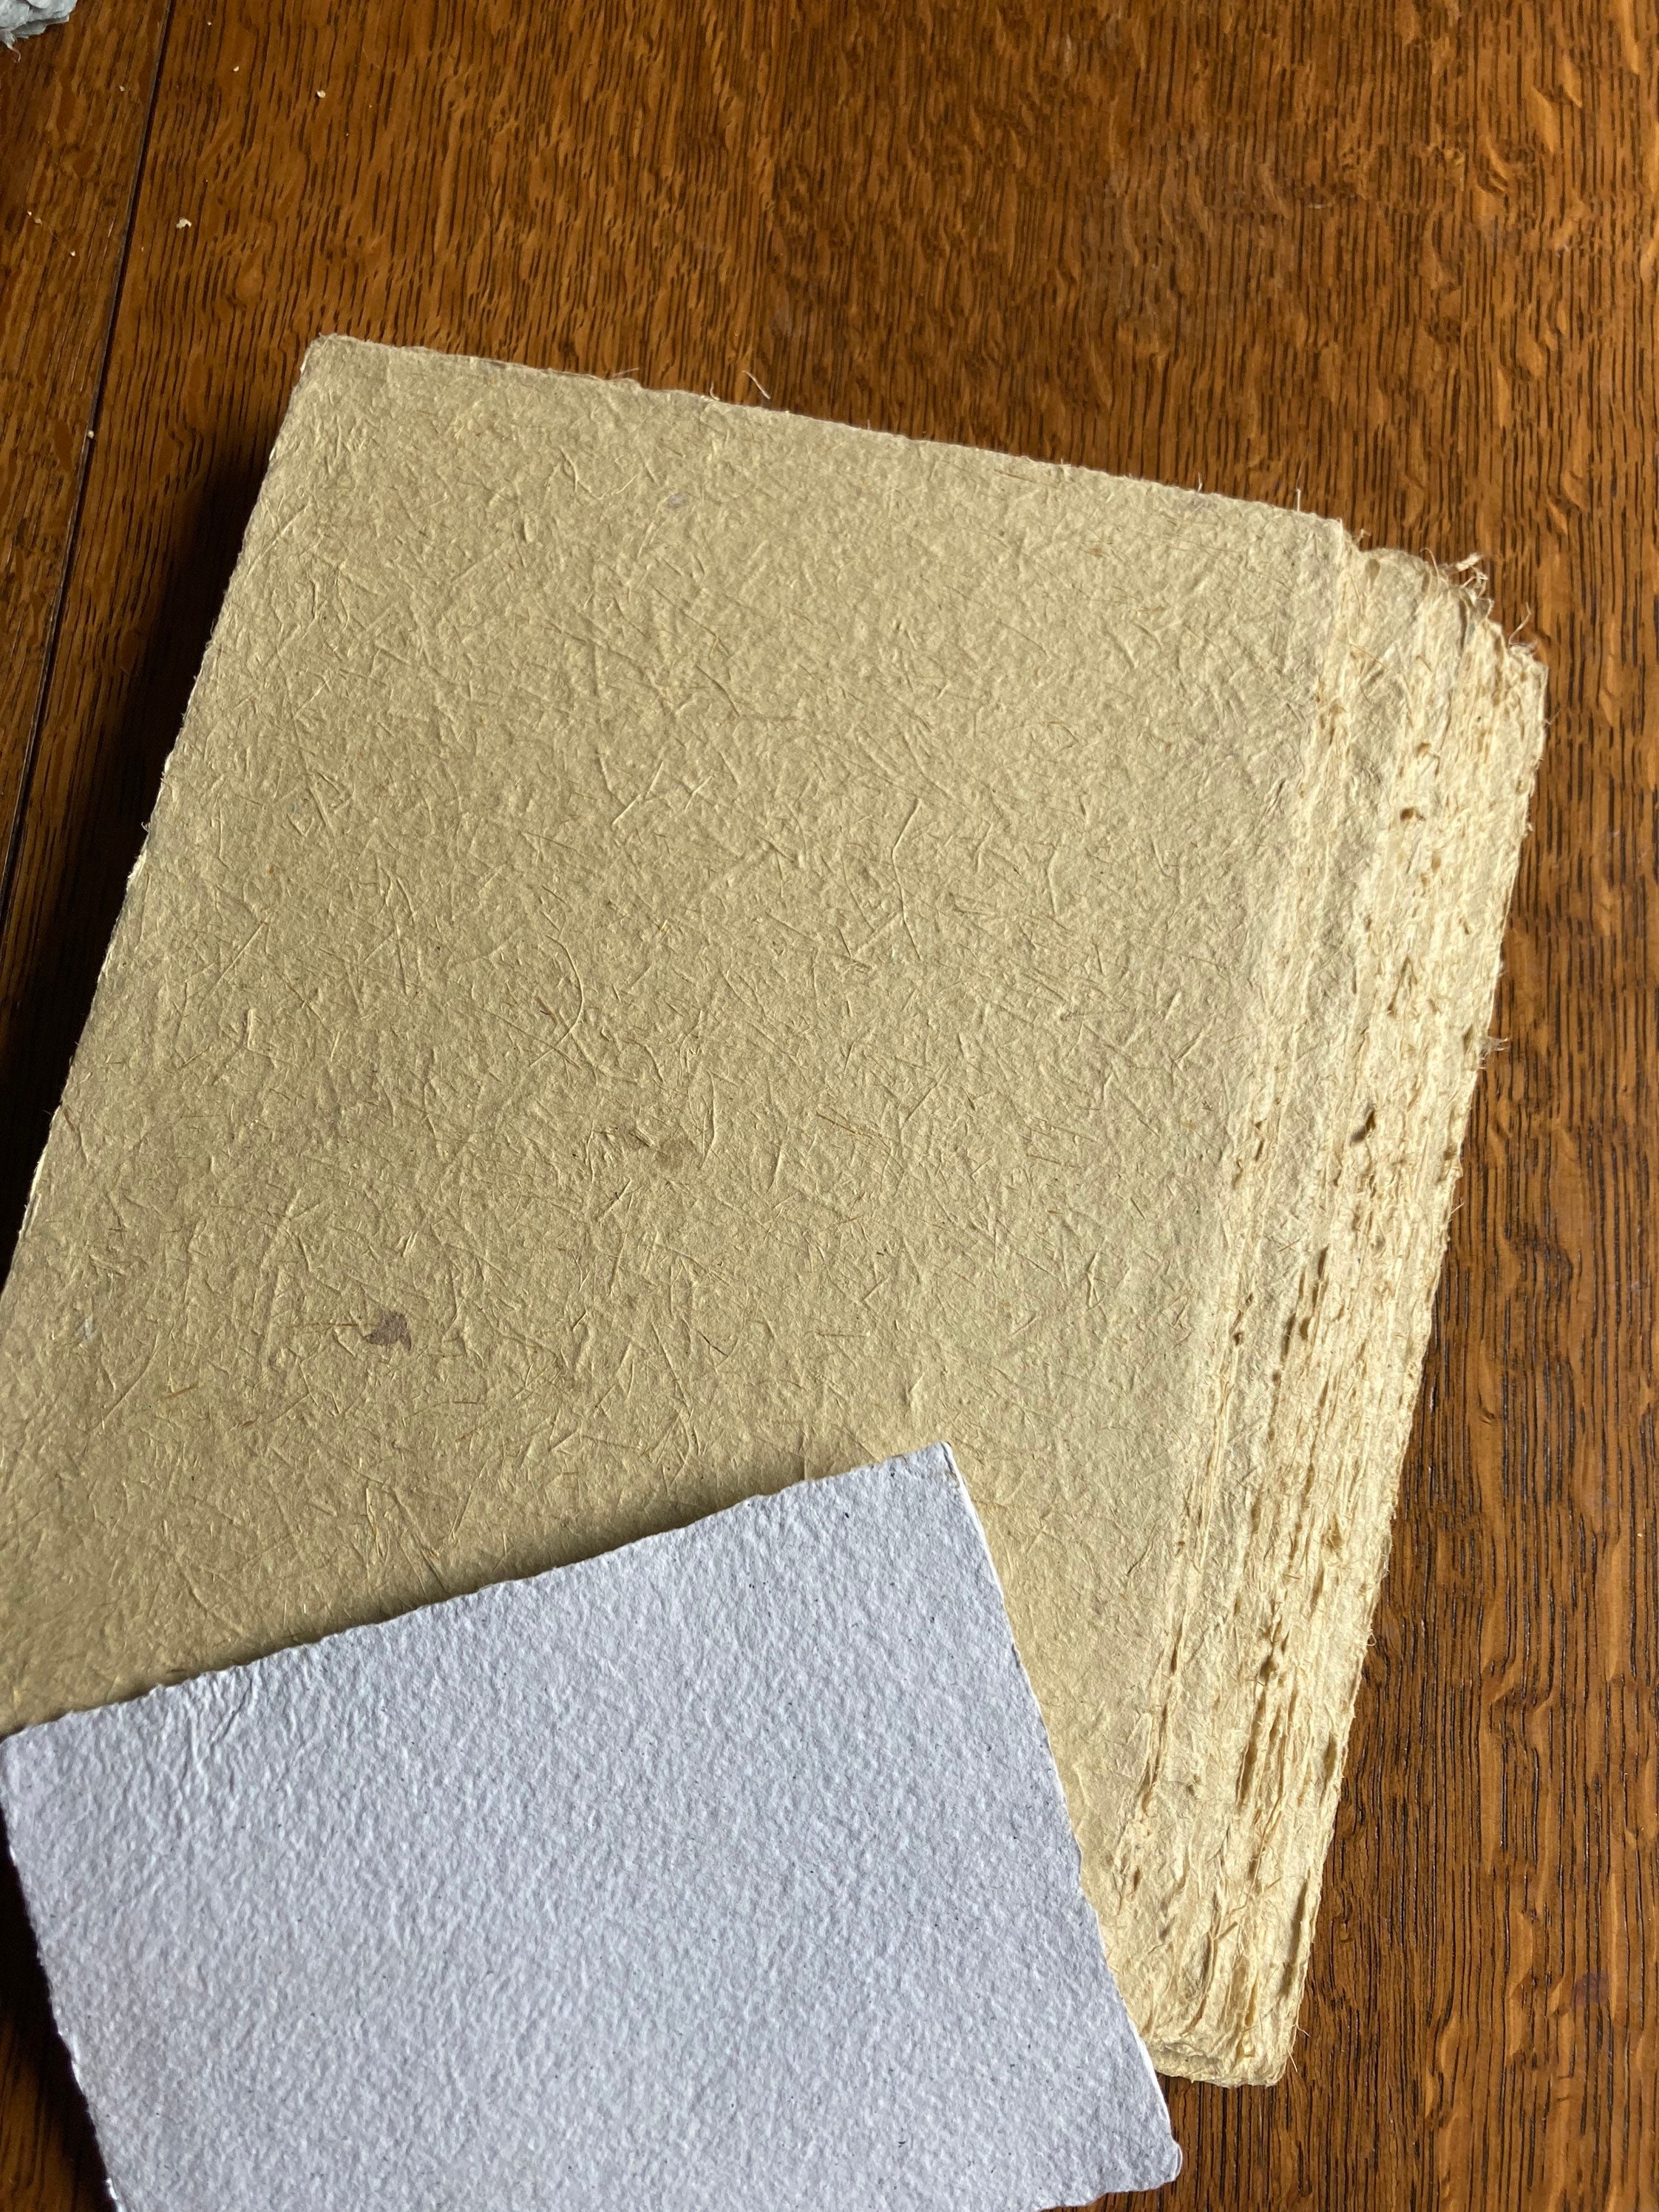 Bamboo Paper 8 5x11 Inch Card Stock Handmade Paper Raw Plant Paper